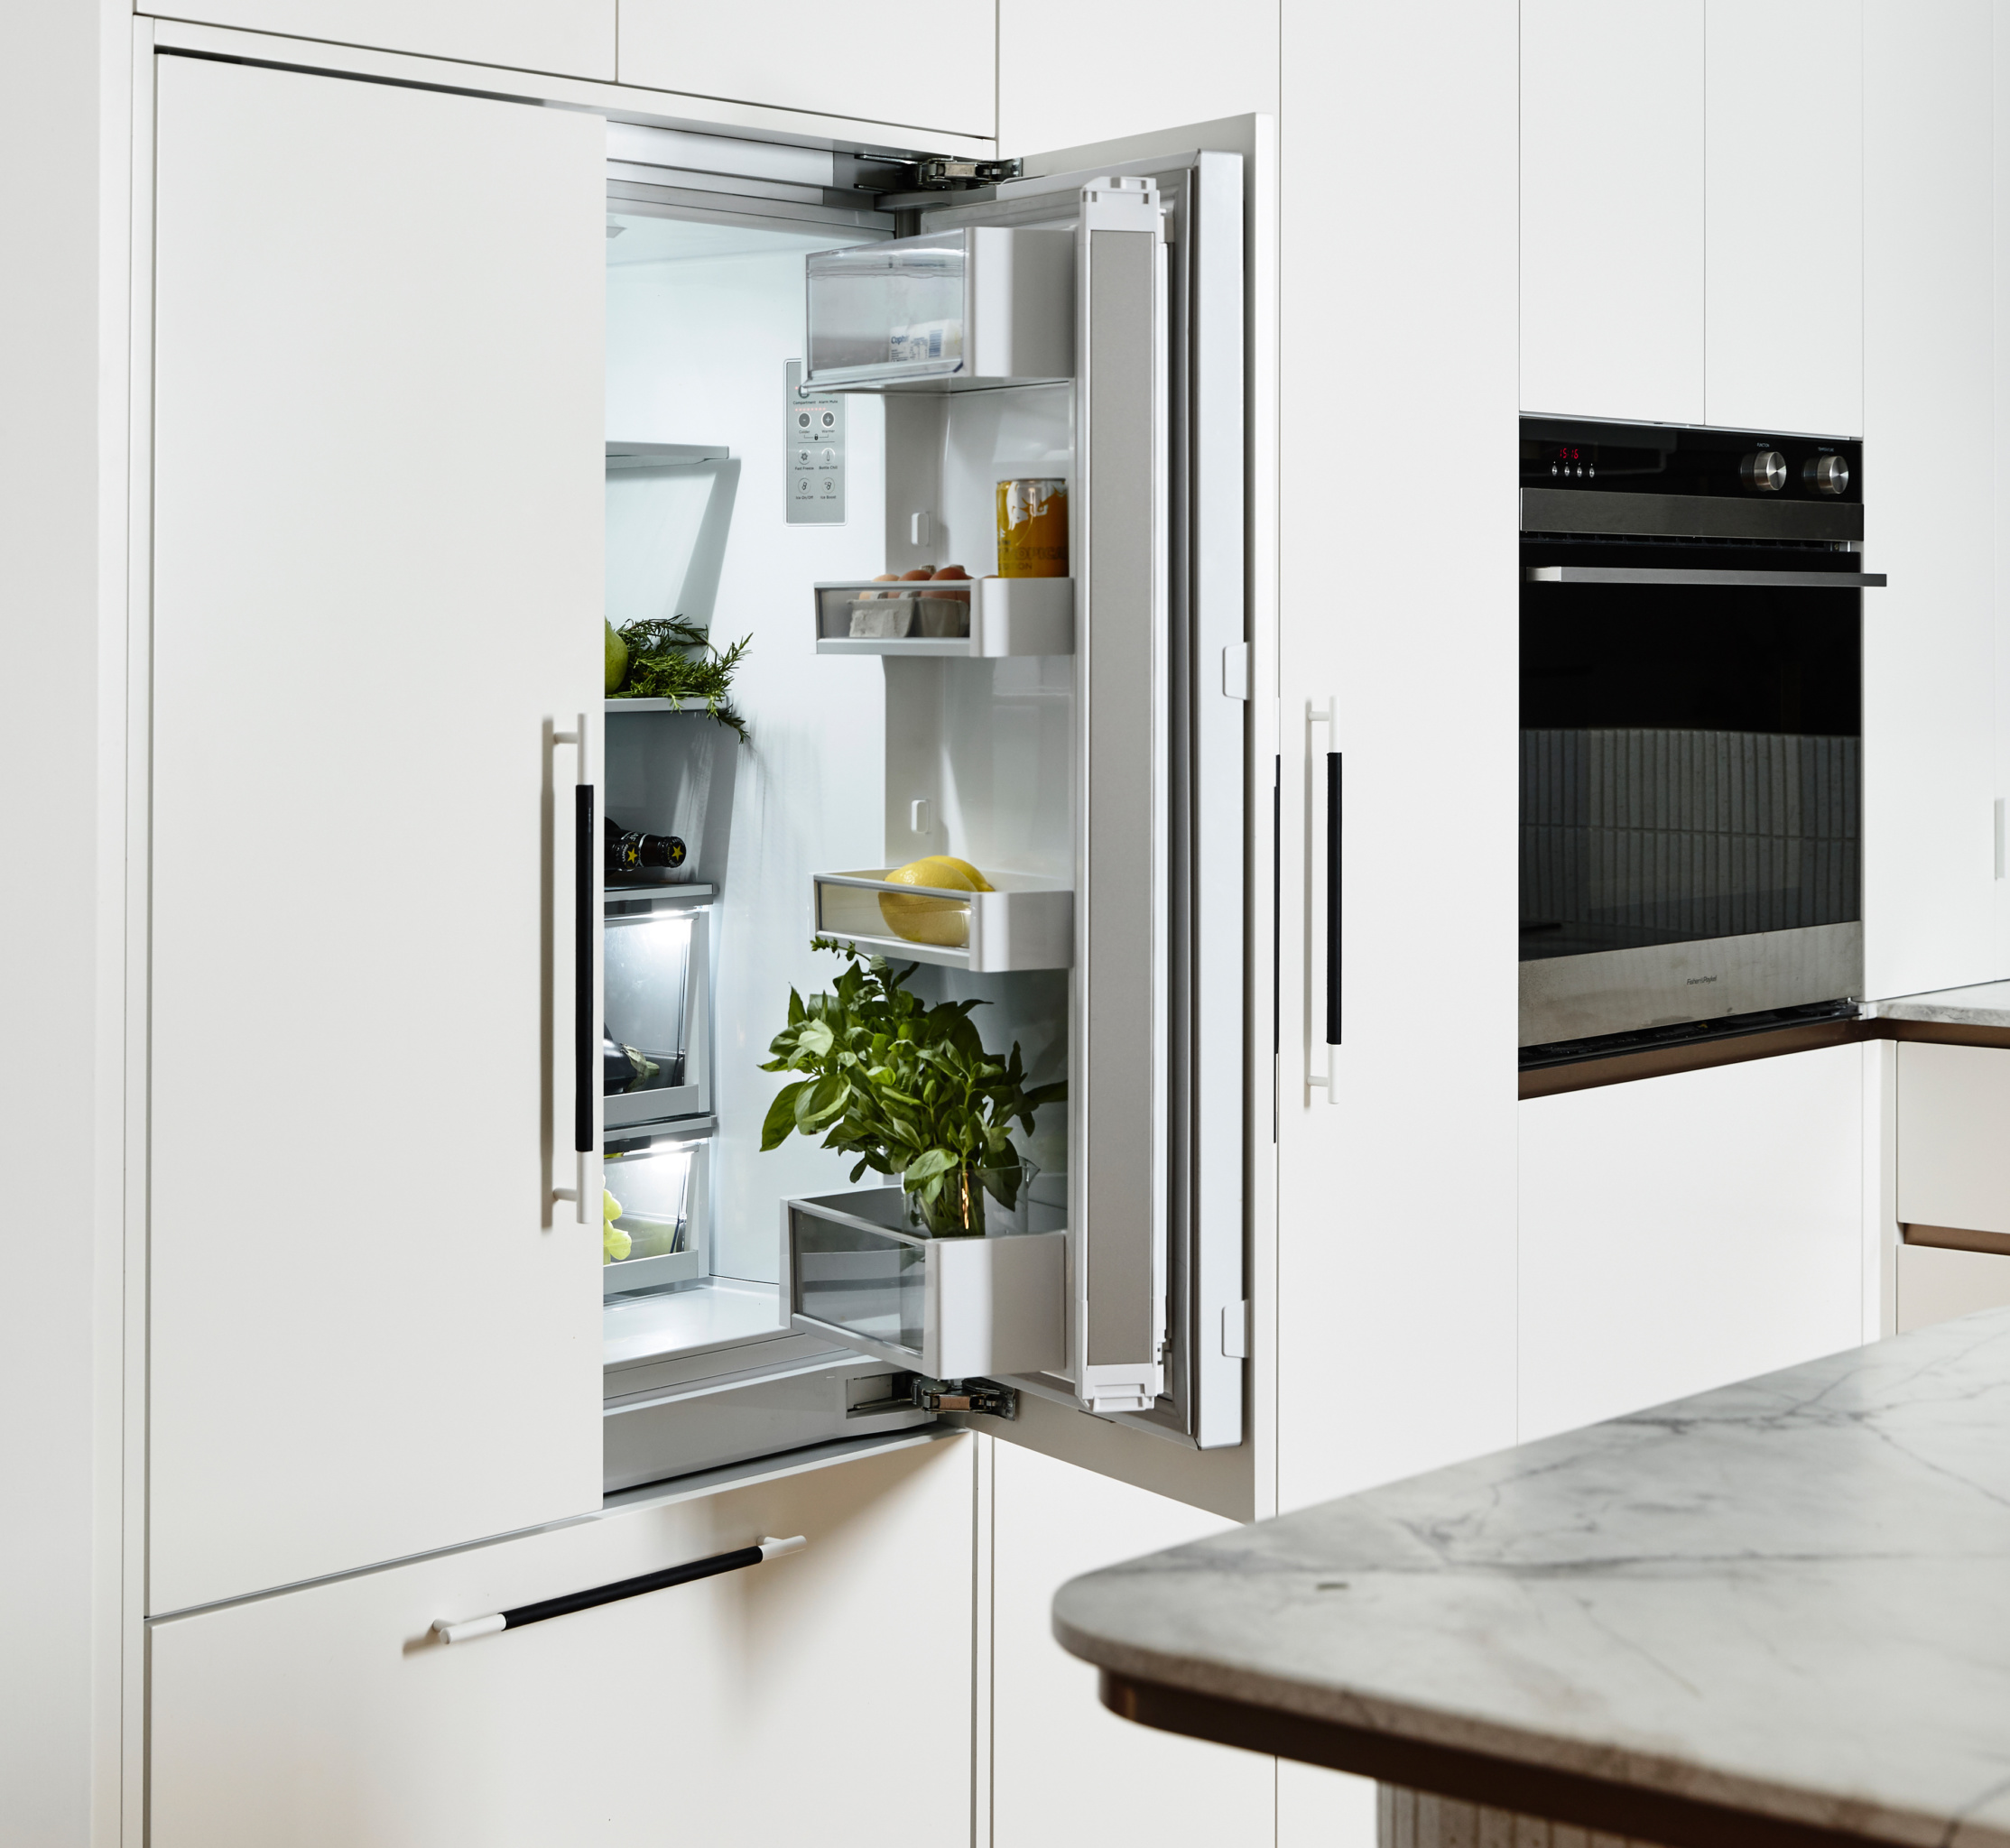 Photo of Fisher & Paykel responsive technology appliances